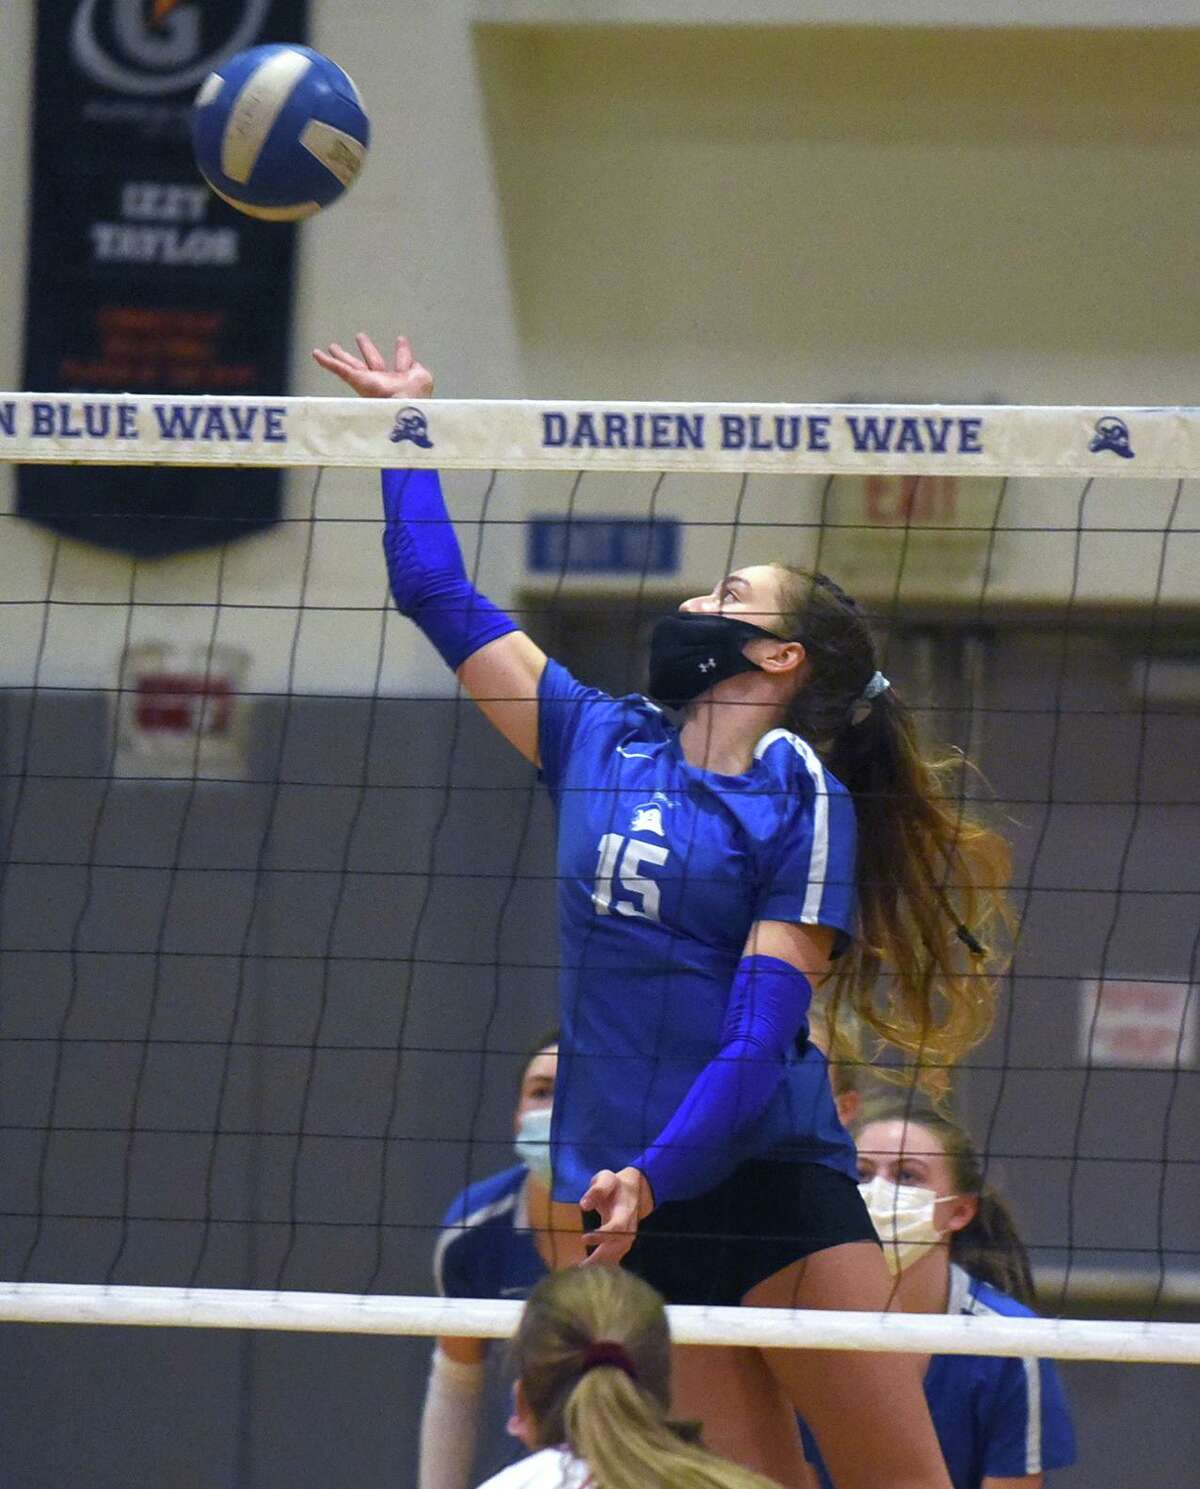 Darien's Leilani Gillespie (15) goes up for a shot during the Blue Wave's girls volleyball match against Greenwich in Darien on Thursday, Oct. 29, 2020.